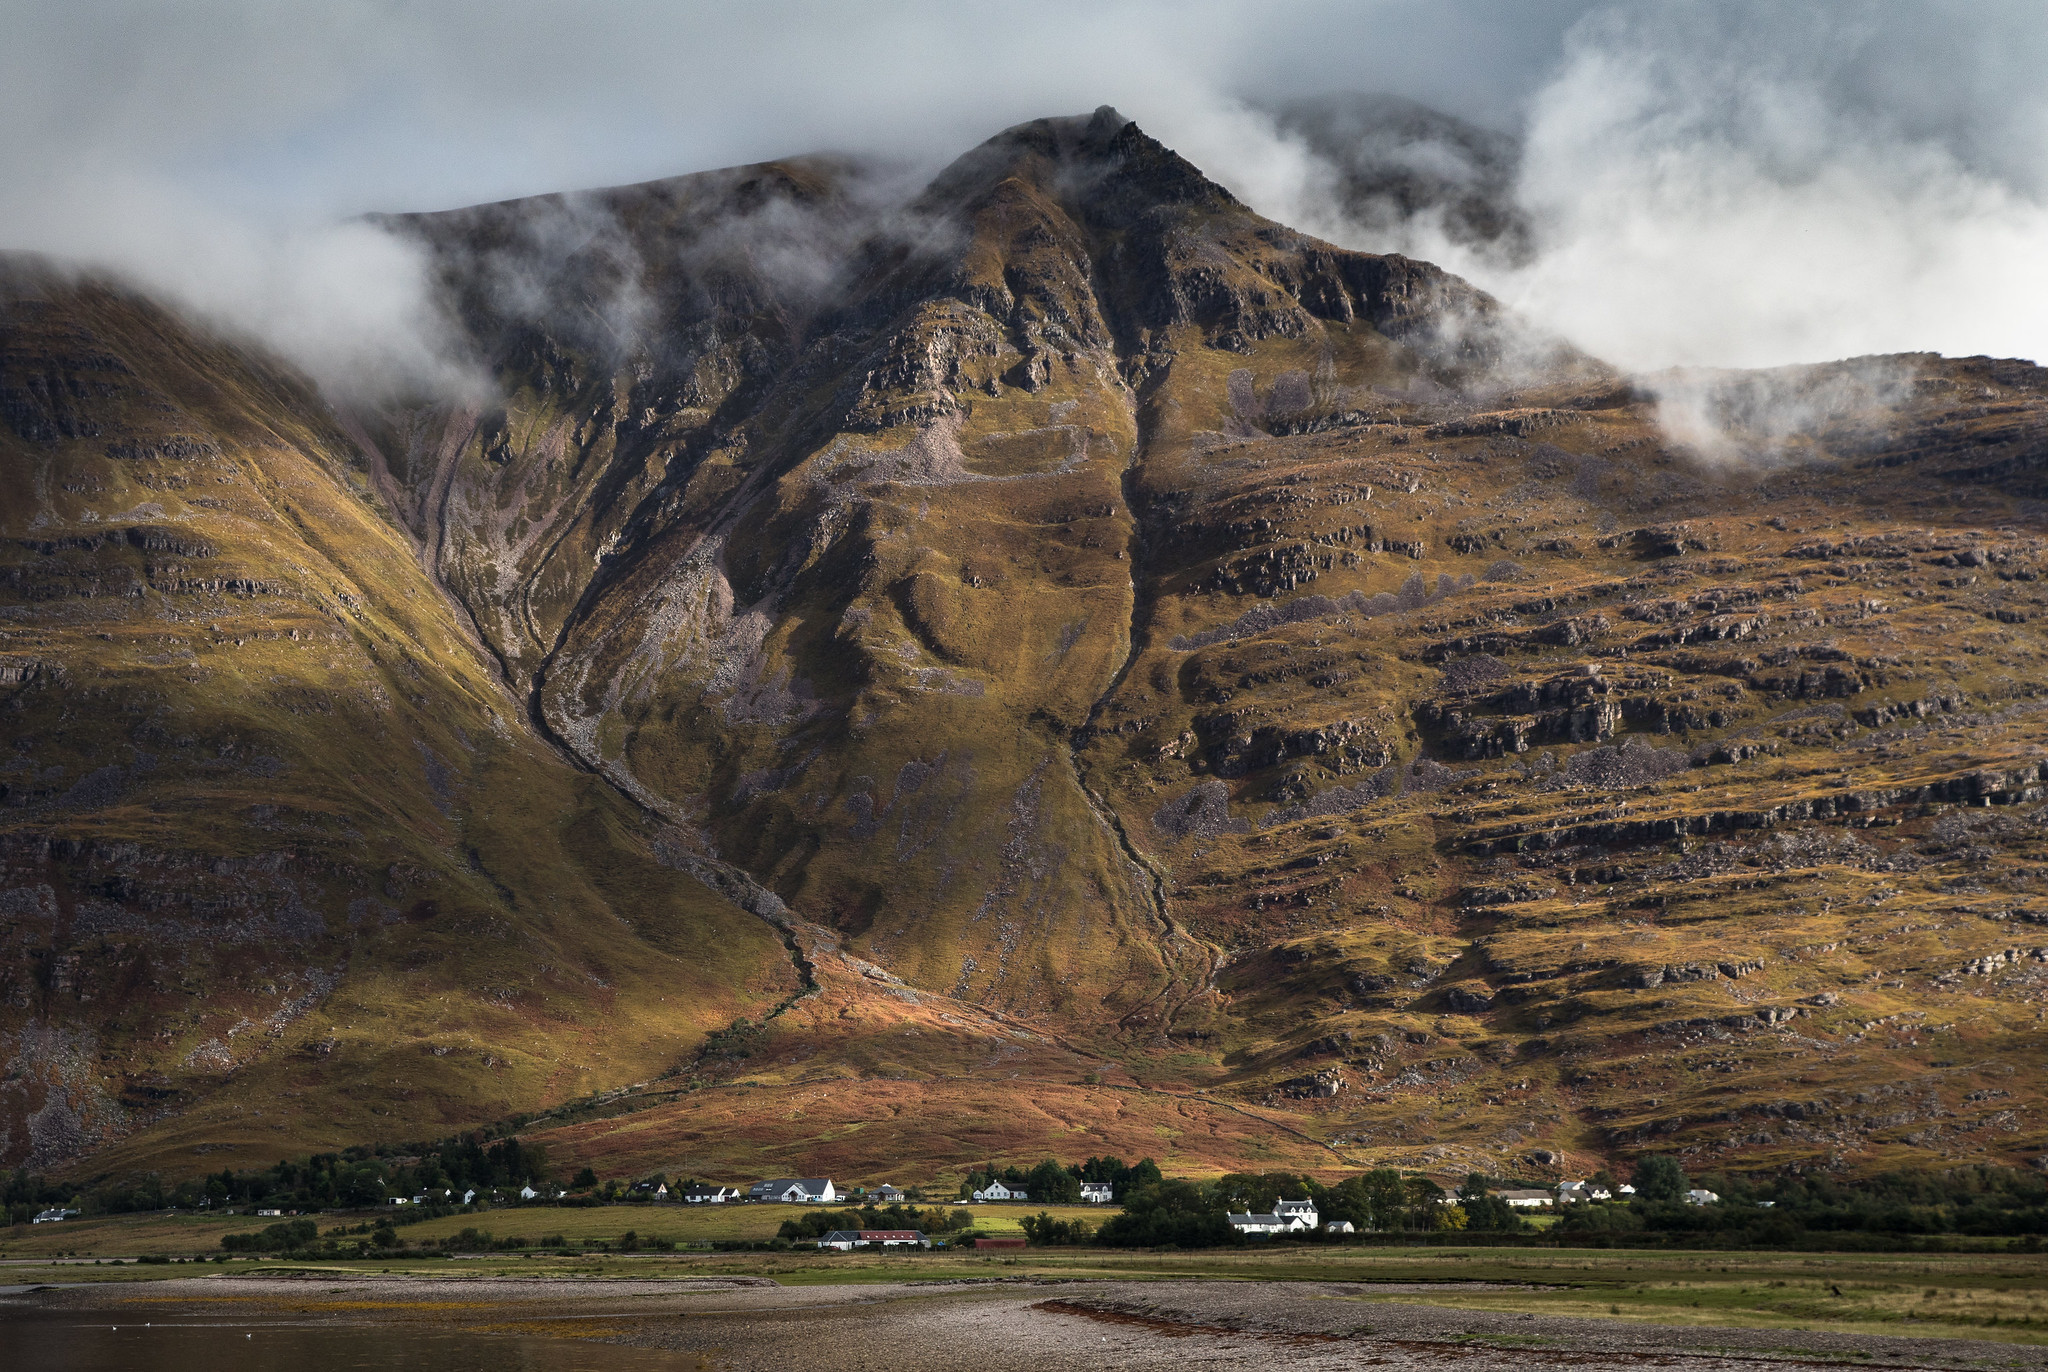 Liathach towers over Torridon village